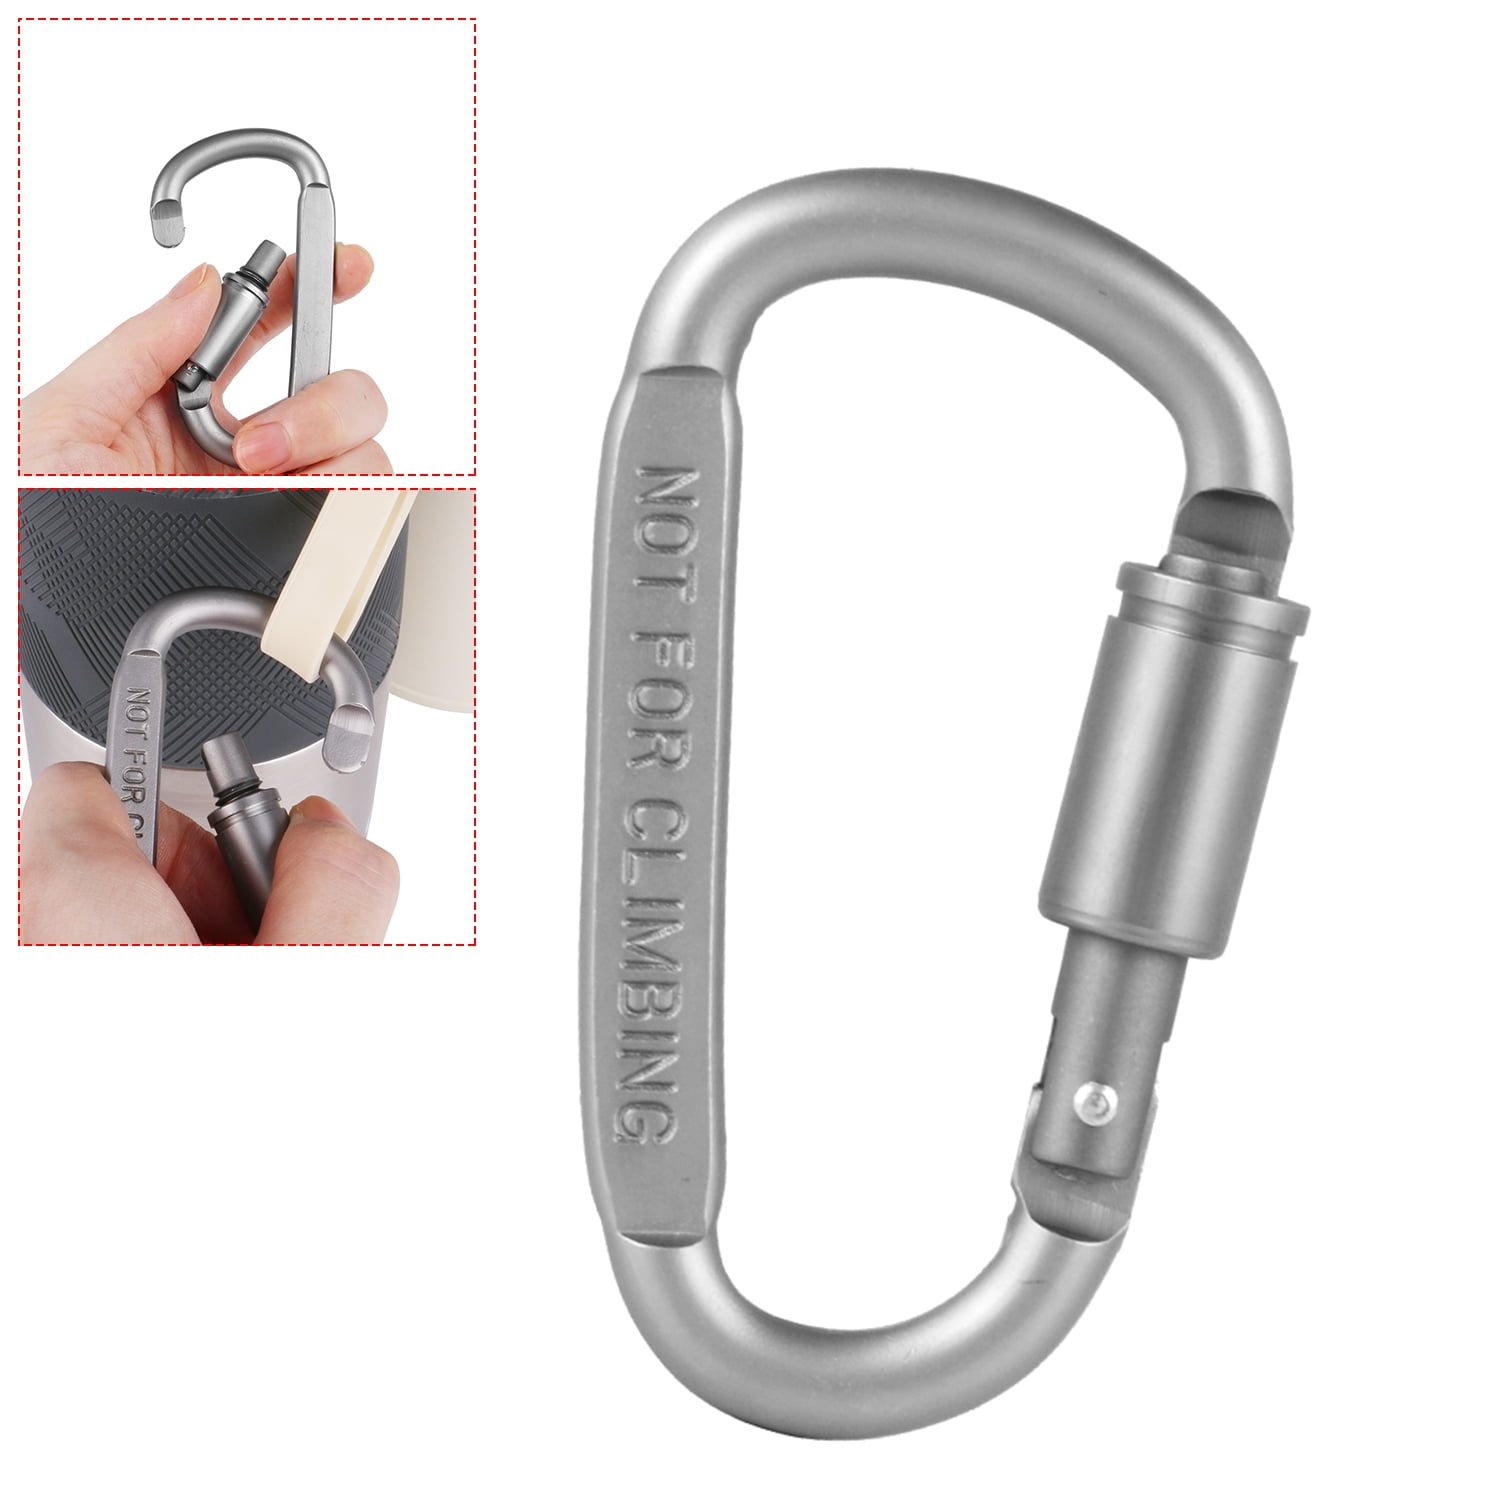 Traveling Backpack Fishing Camping Aluminum Alloy D-Ring Locking Carabiner Clip Keychain Hook Clips Locking Carabiner Hiking Clips with Screw Gate Lock Heavy Duty for Outdoor Hiking